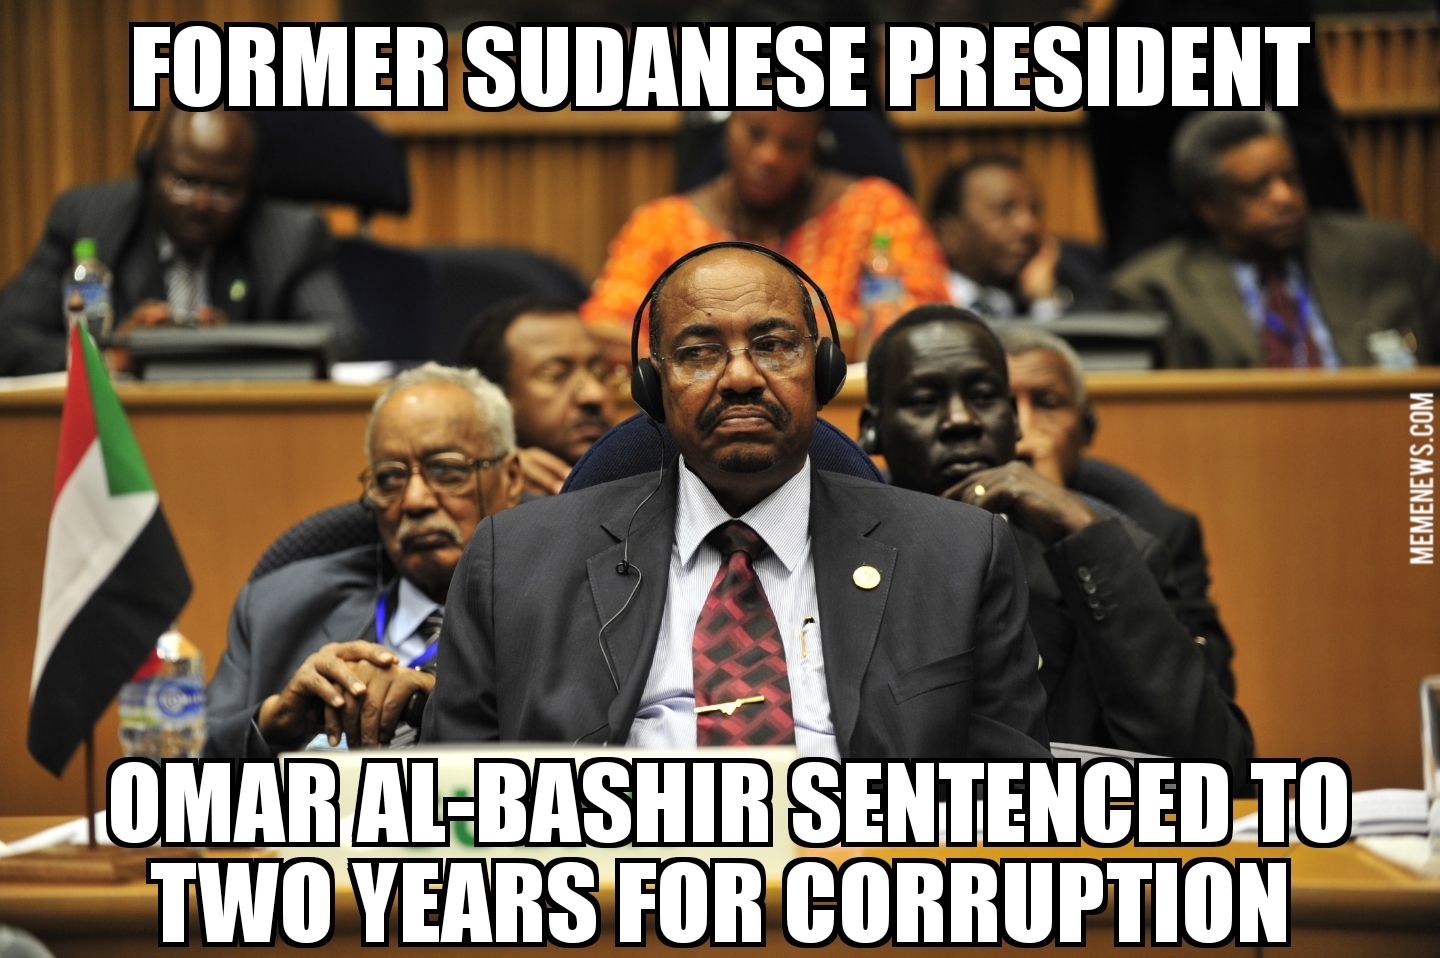 Omar al-Bashir sentenced to two years for corruption